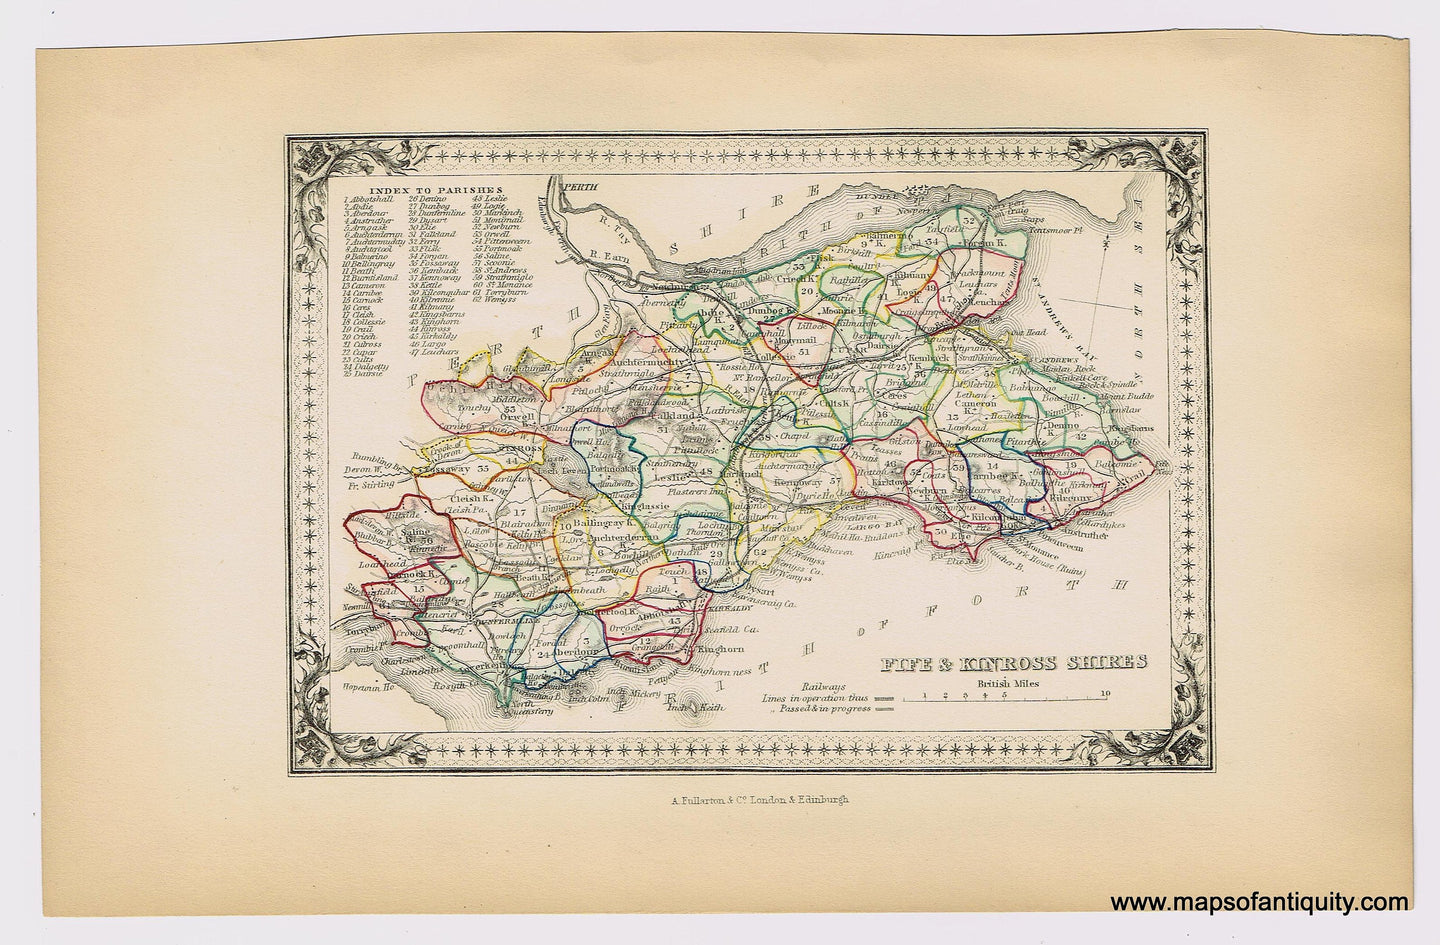 Genuine-Antique-Hand-colored-Map-Fife-and-Kinross-Shires-Scotland--1855-A-Fullarton-Co--Maps-Of-Antiquity